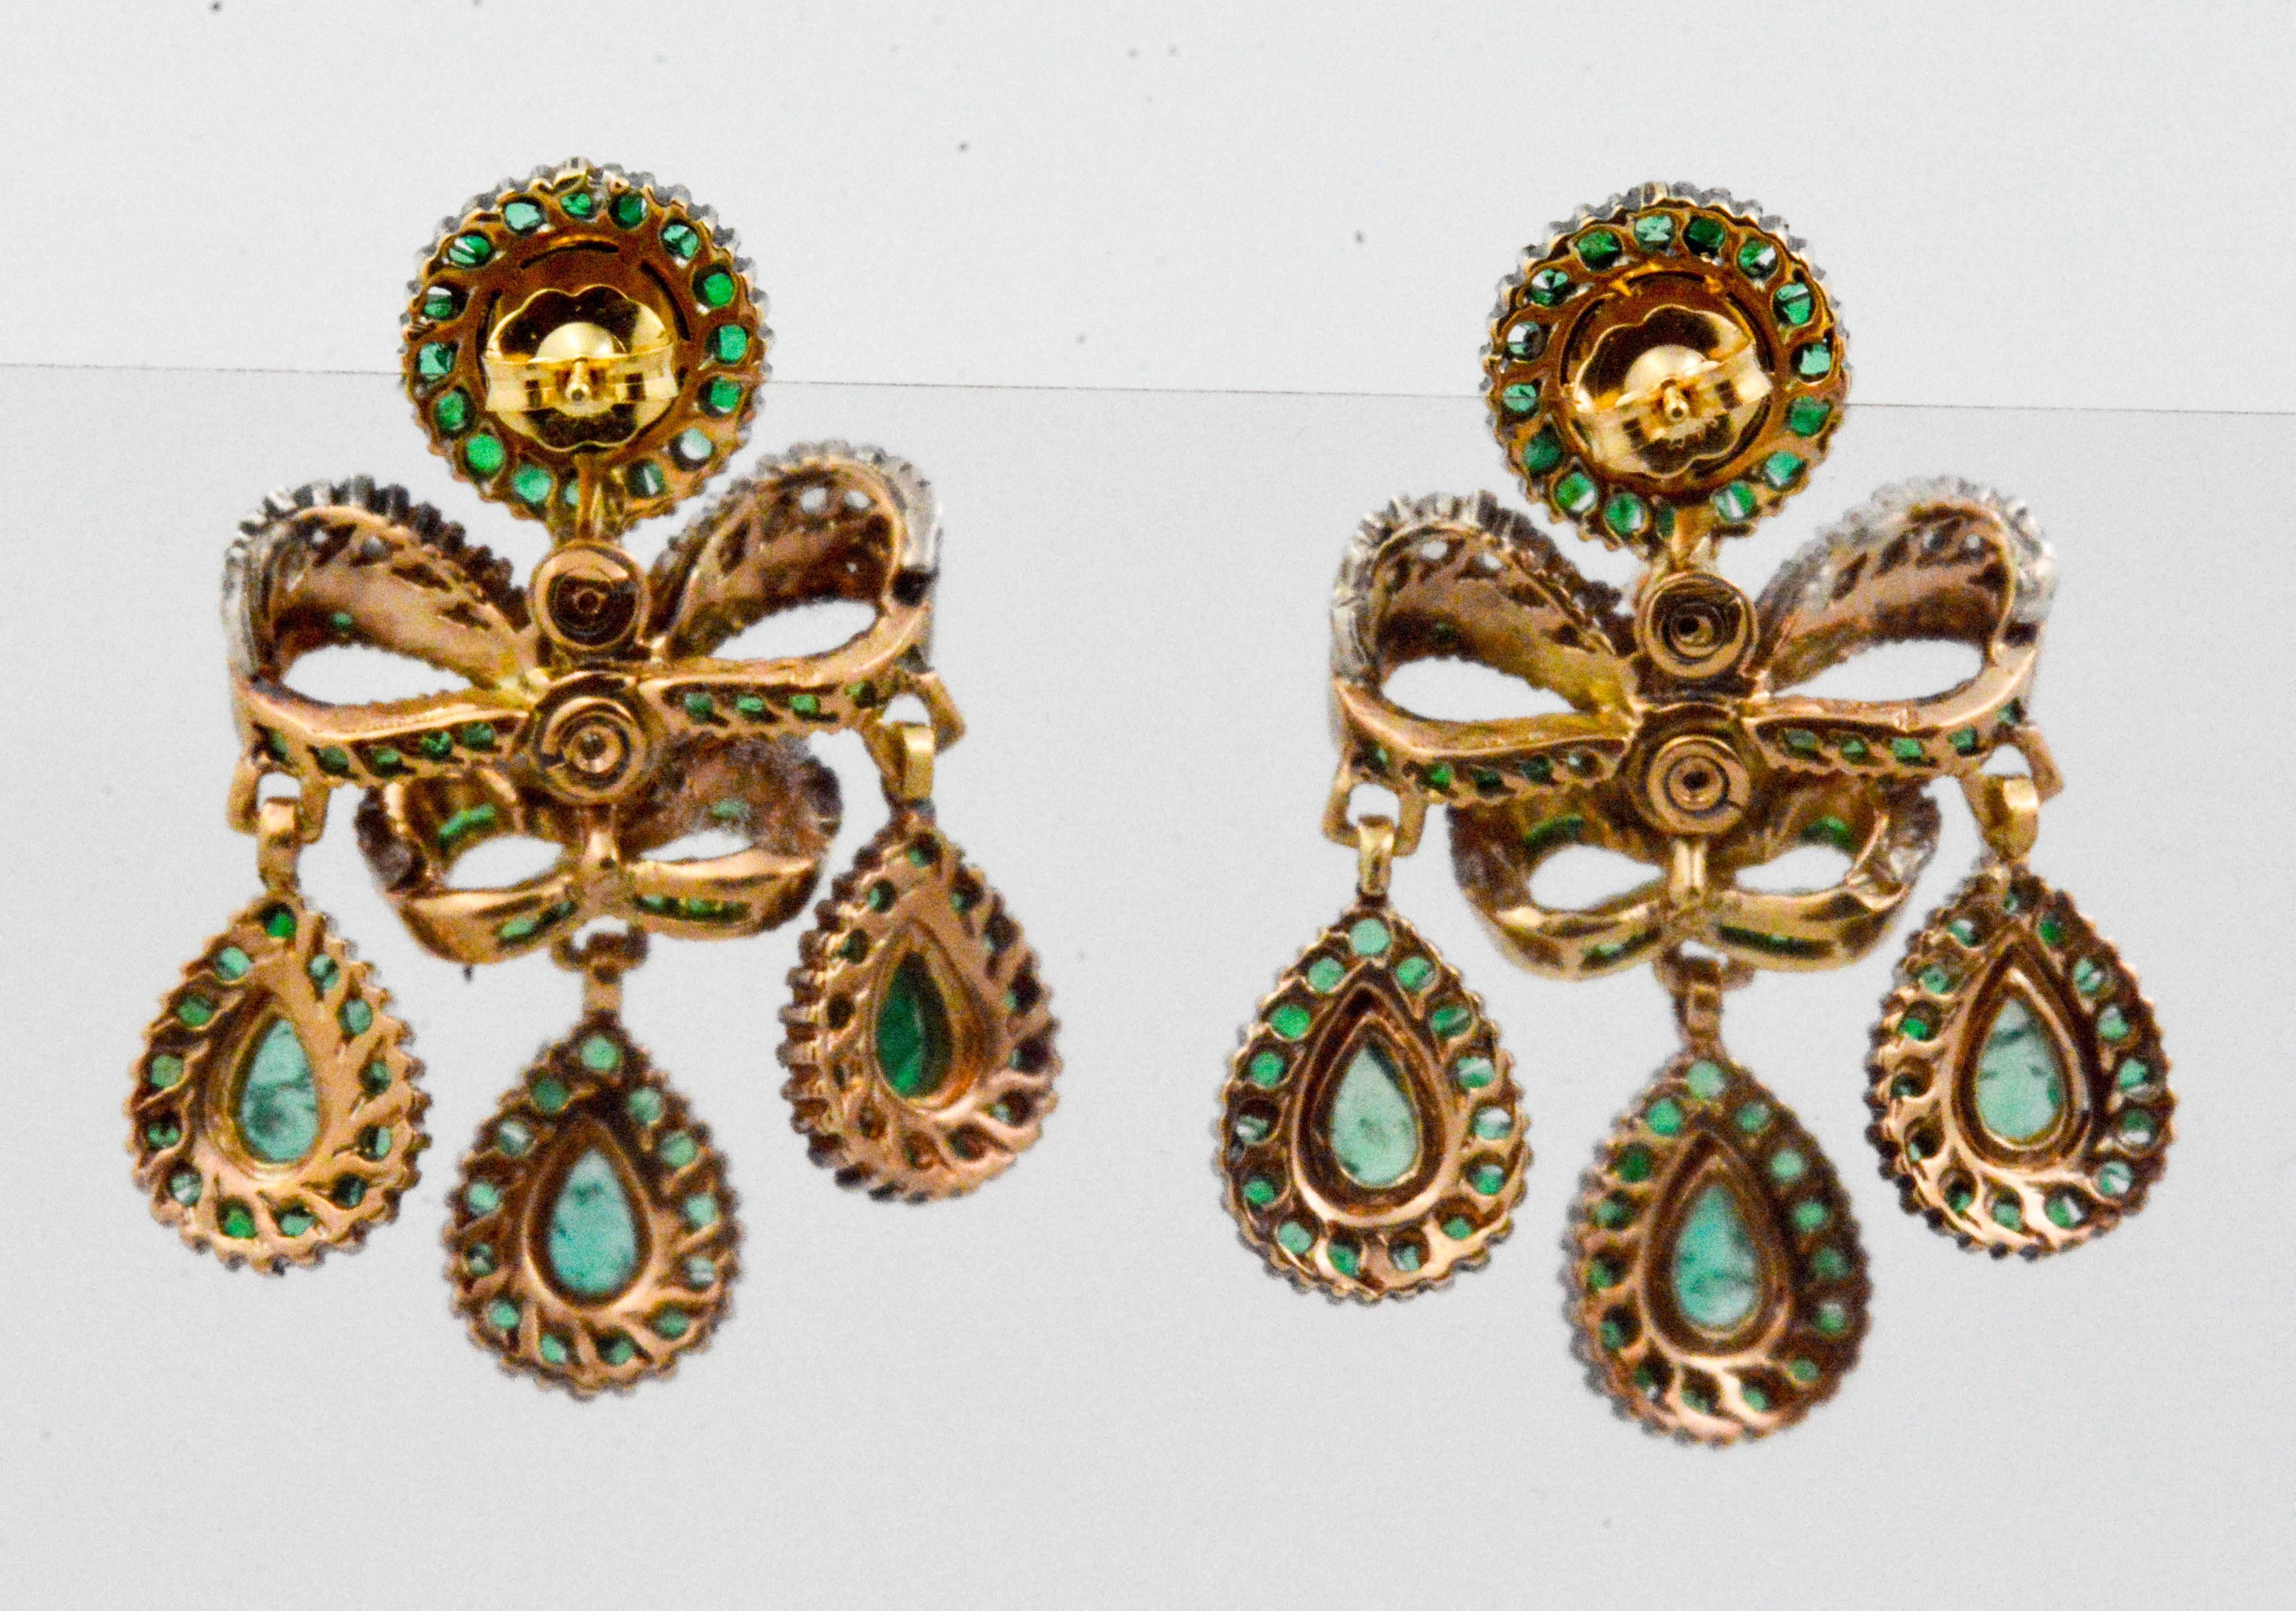 This vintage pair of Georgian earrings have a story to tell. Created during the 1780's, these emerald and European cut diamond earrings are in incredible condition. Crafted in 14 karat gold and silver, three tear drops of emeralds and diamonds